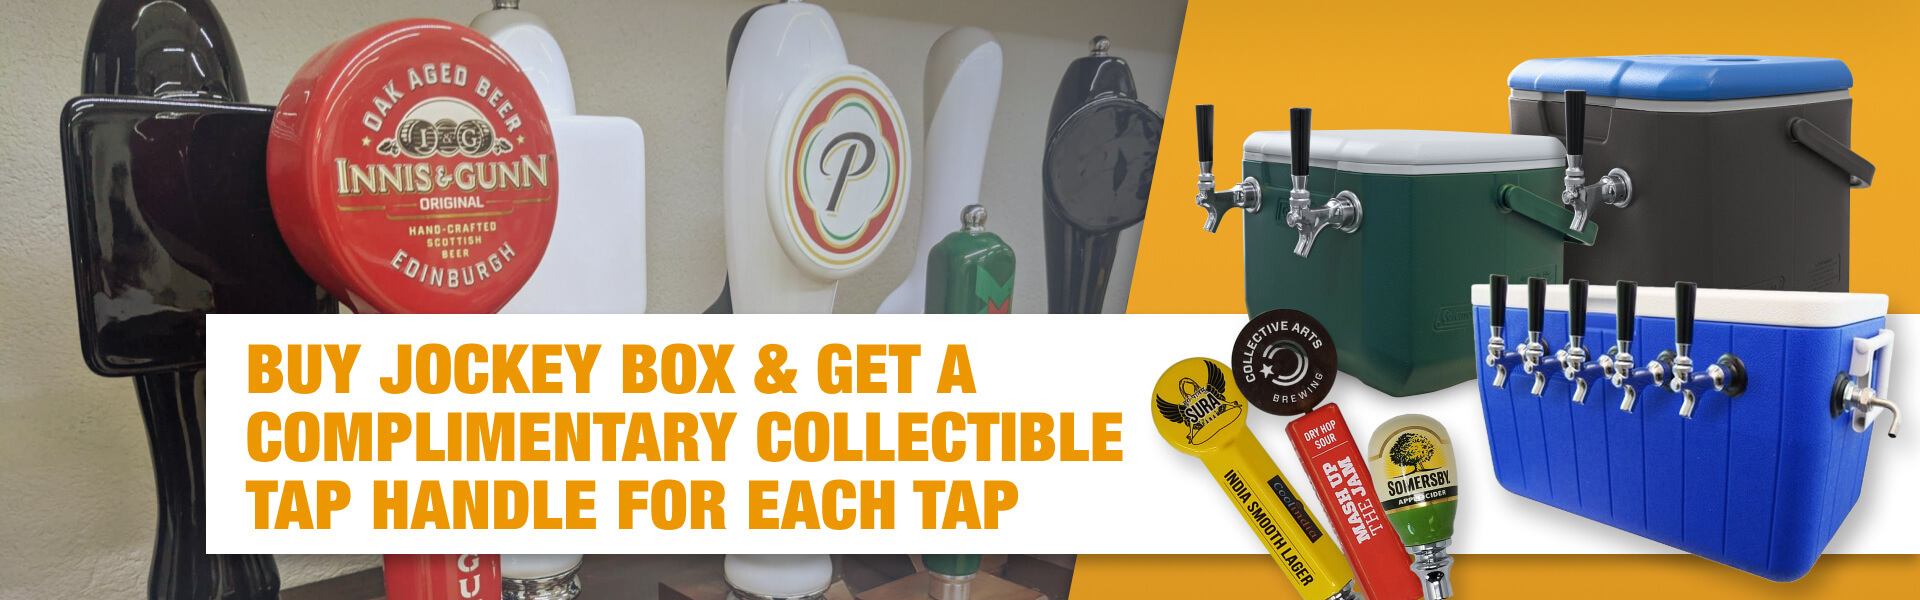 buy jockey box and get a complimentary collectible tap handle for each tap